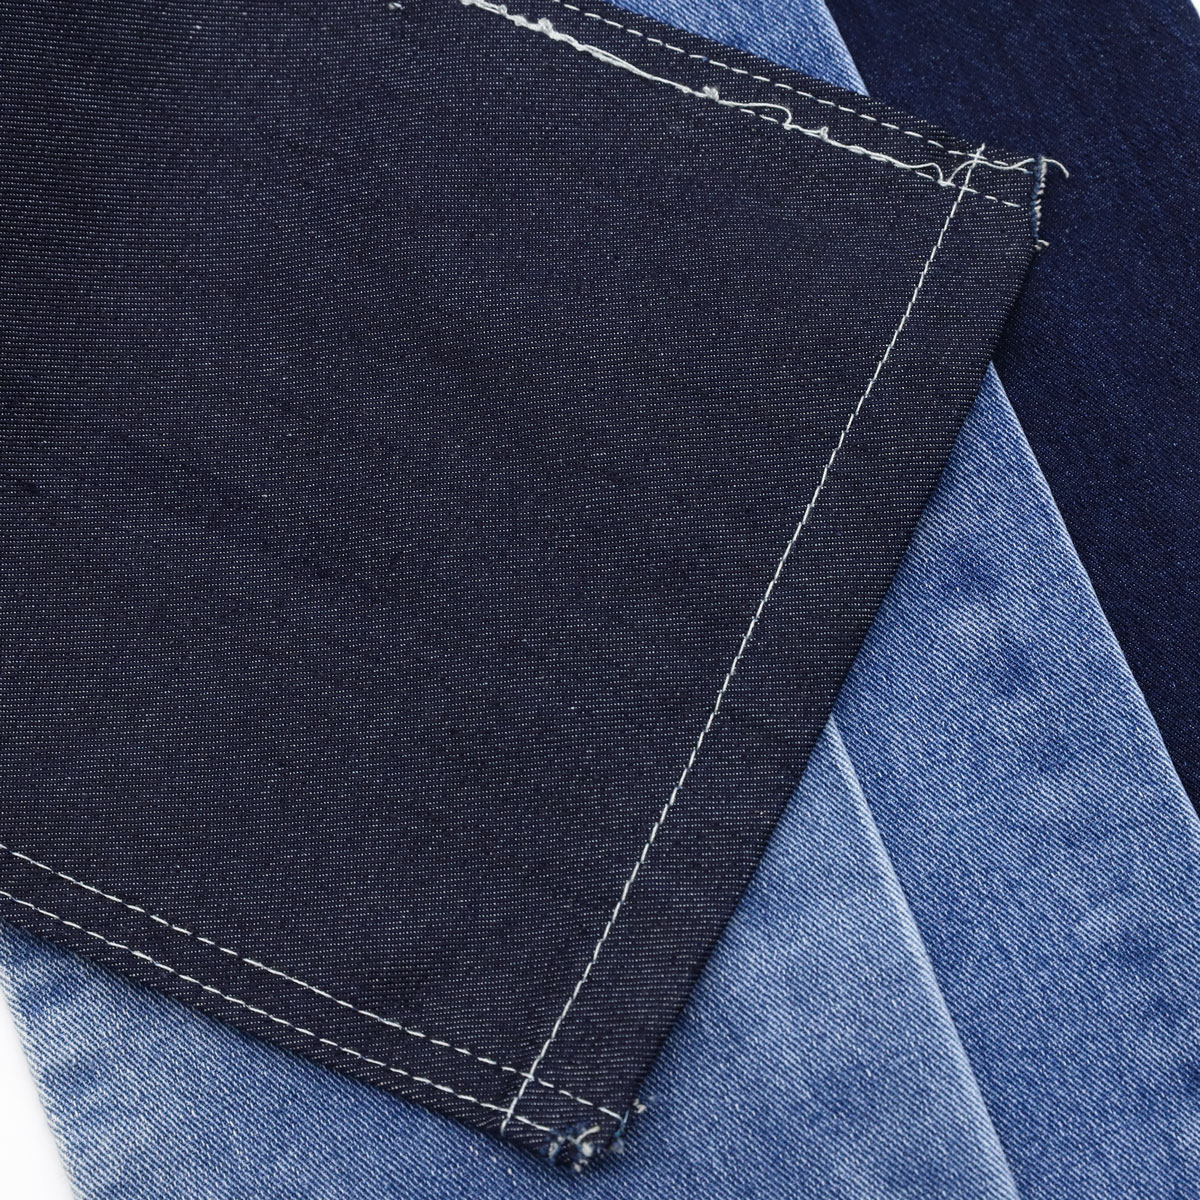 A Quick Guide to the Denim Fabric Material for Industries 1